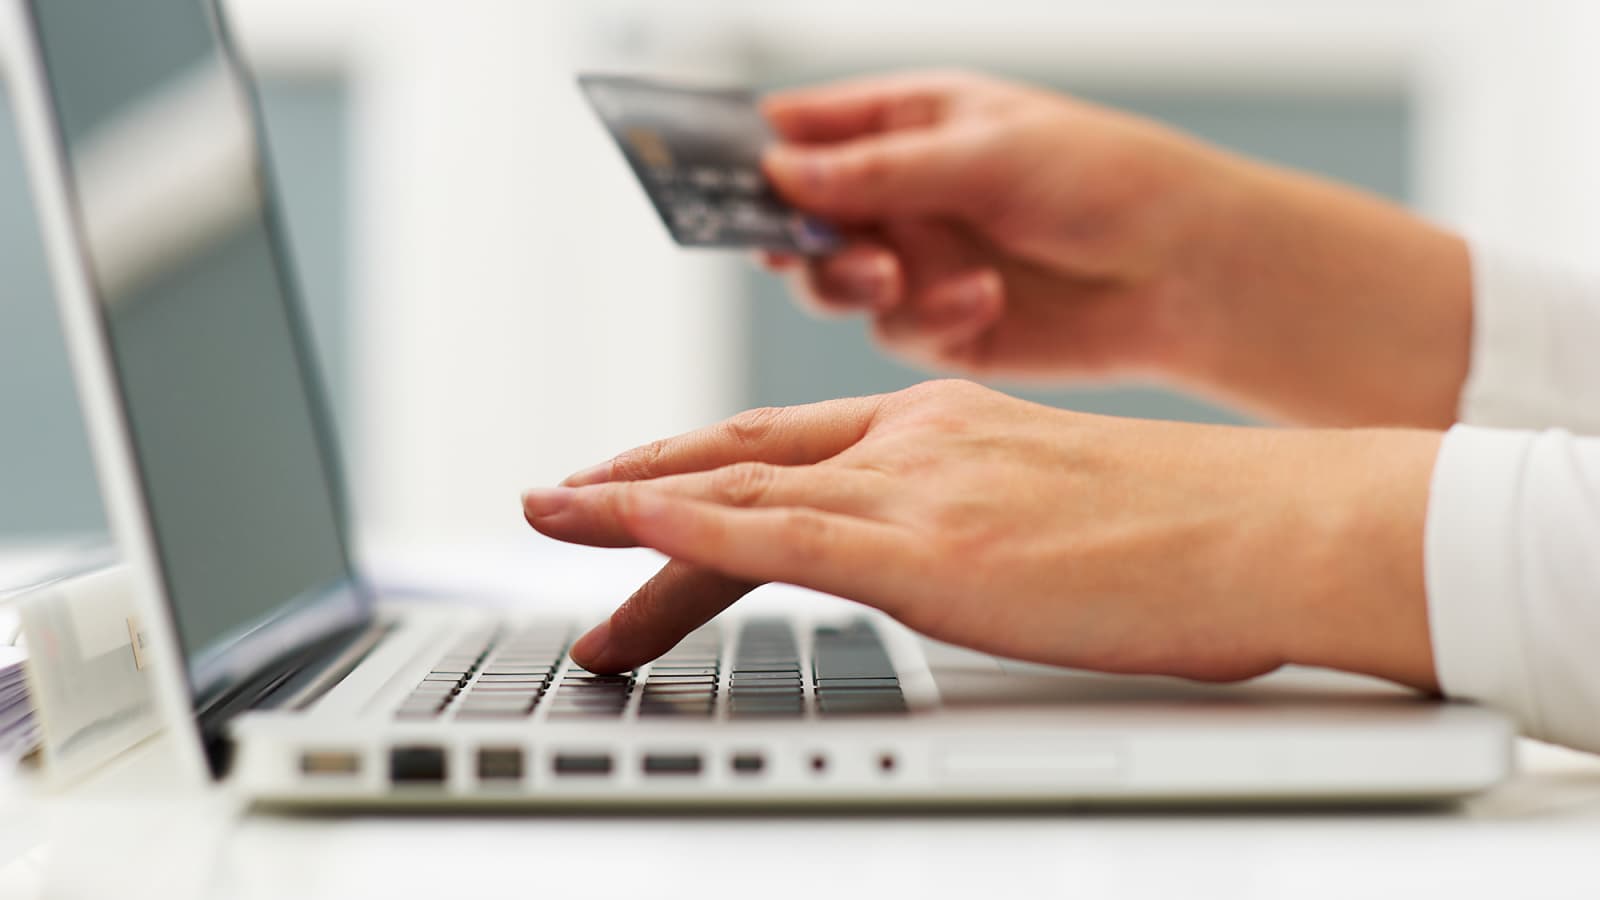 Online shopping satisfaction hits 12-year low